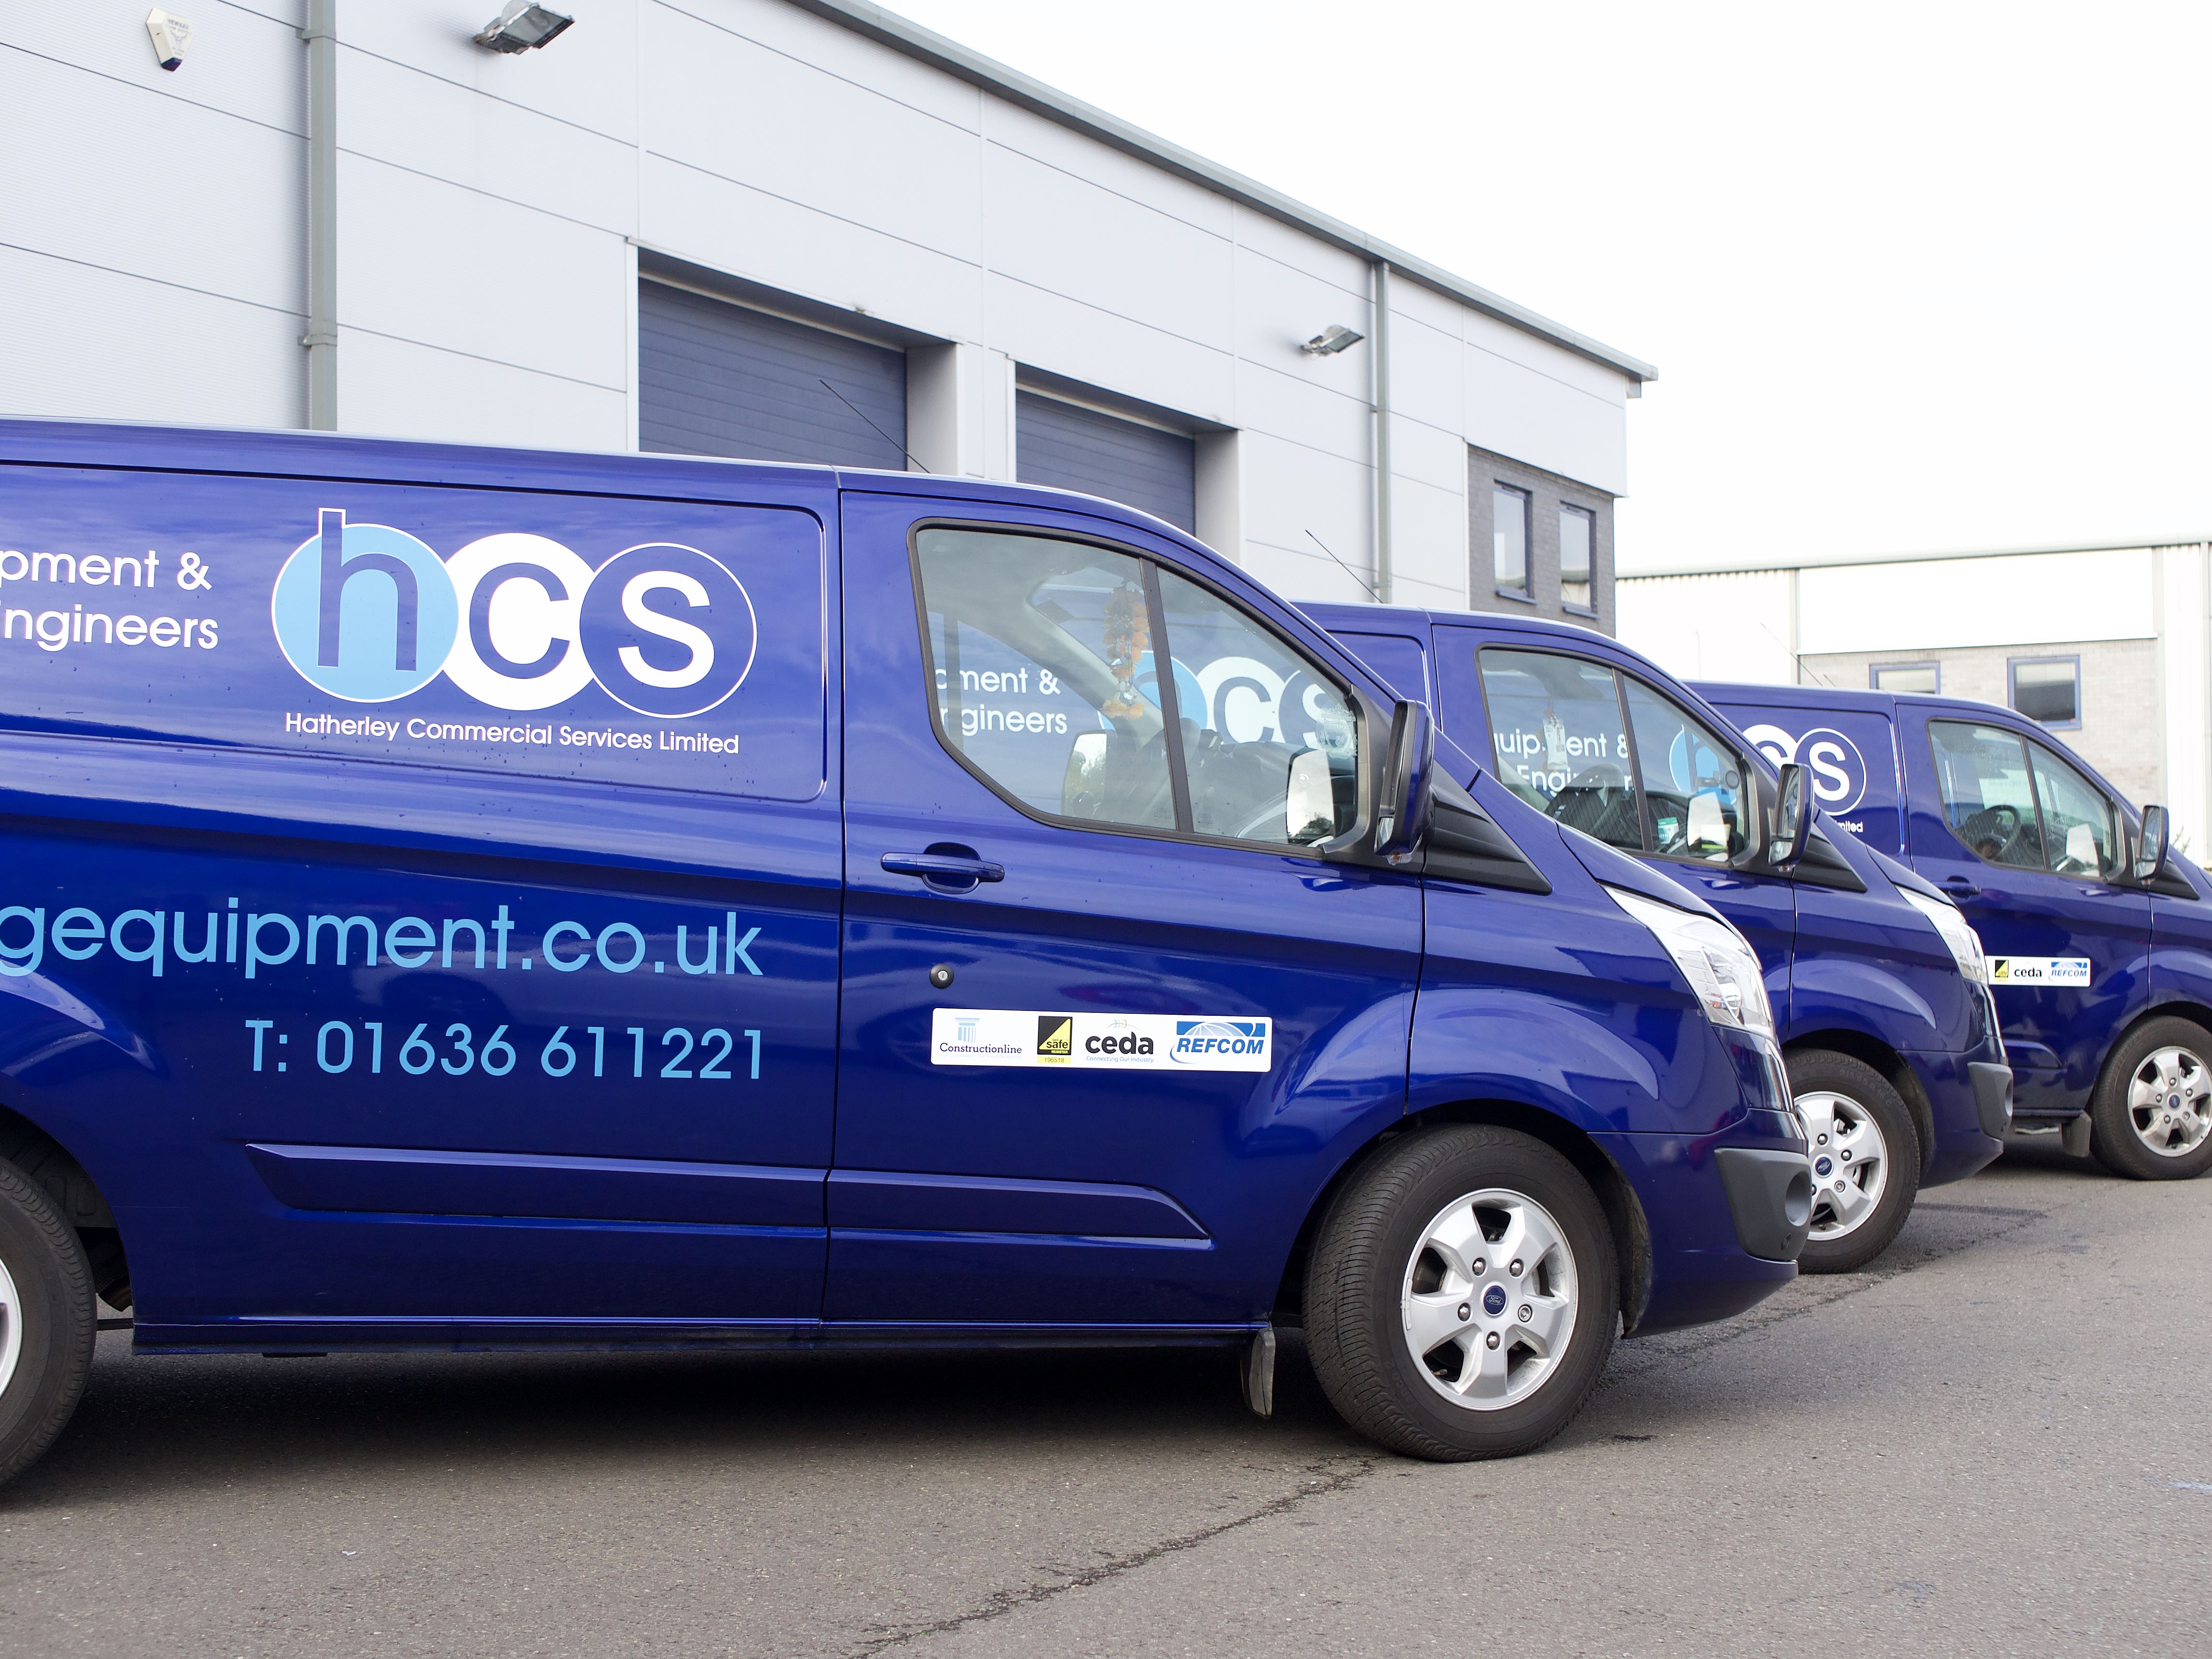 About Us - Hatherley Commercial Services Limited : Hatherley Commercial ...